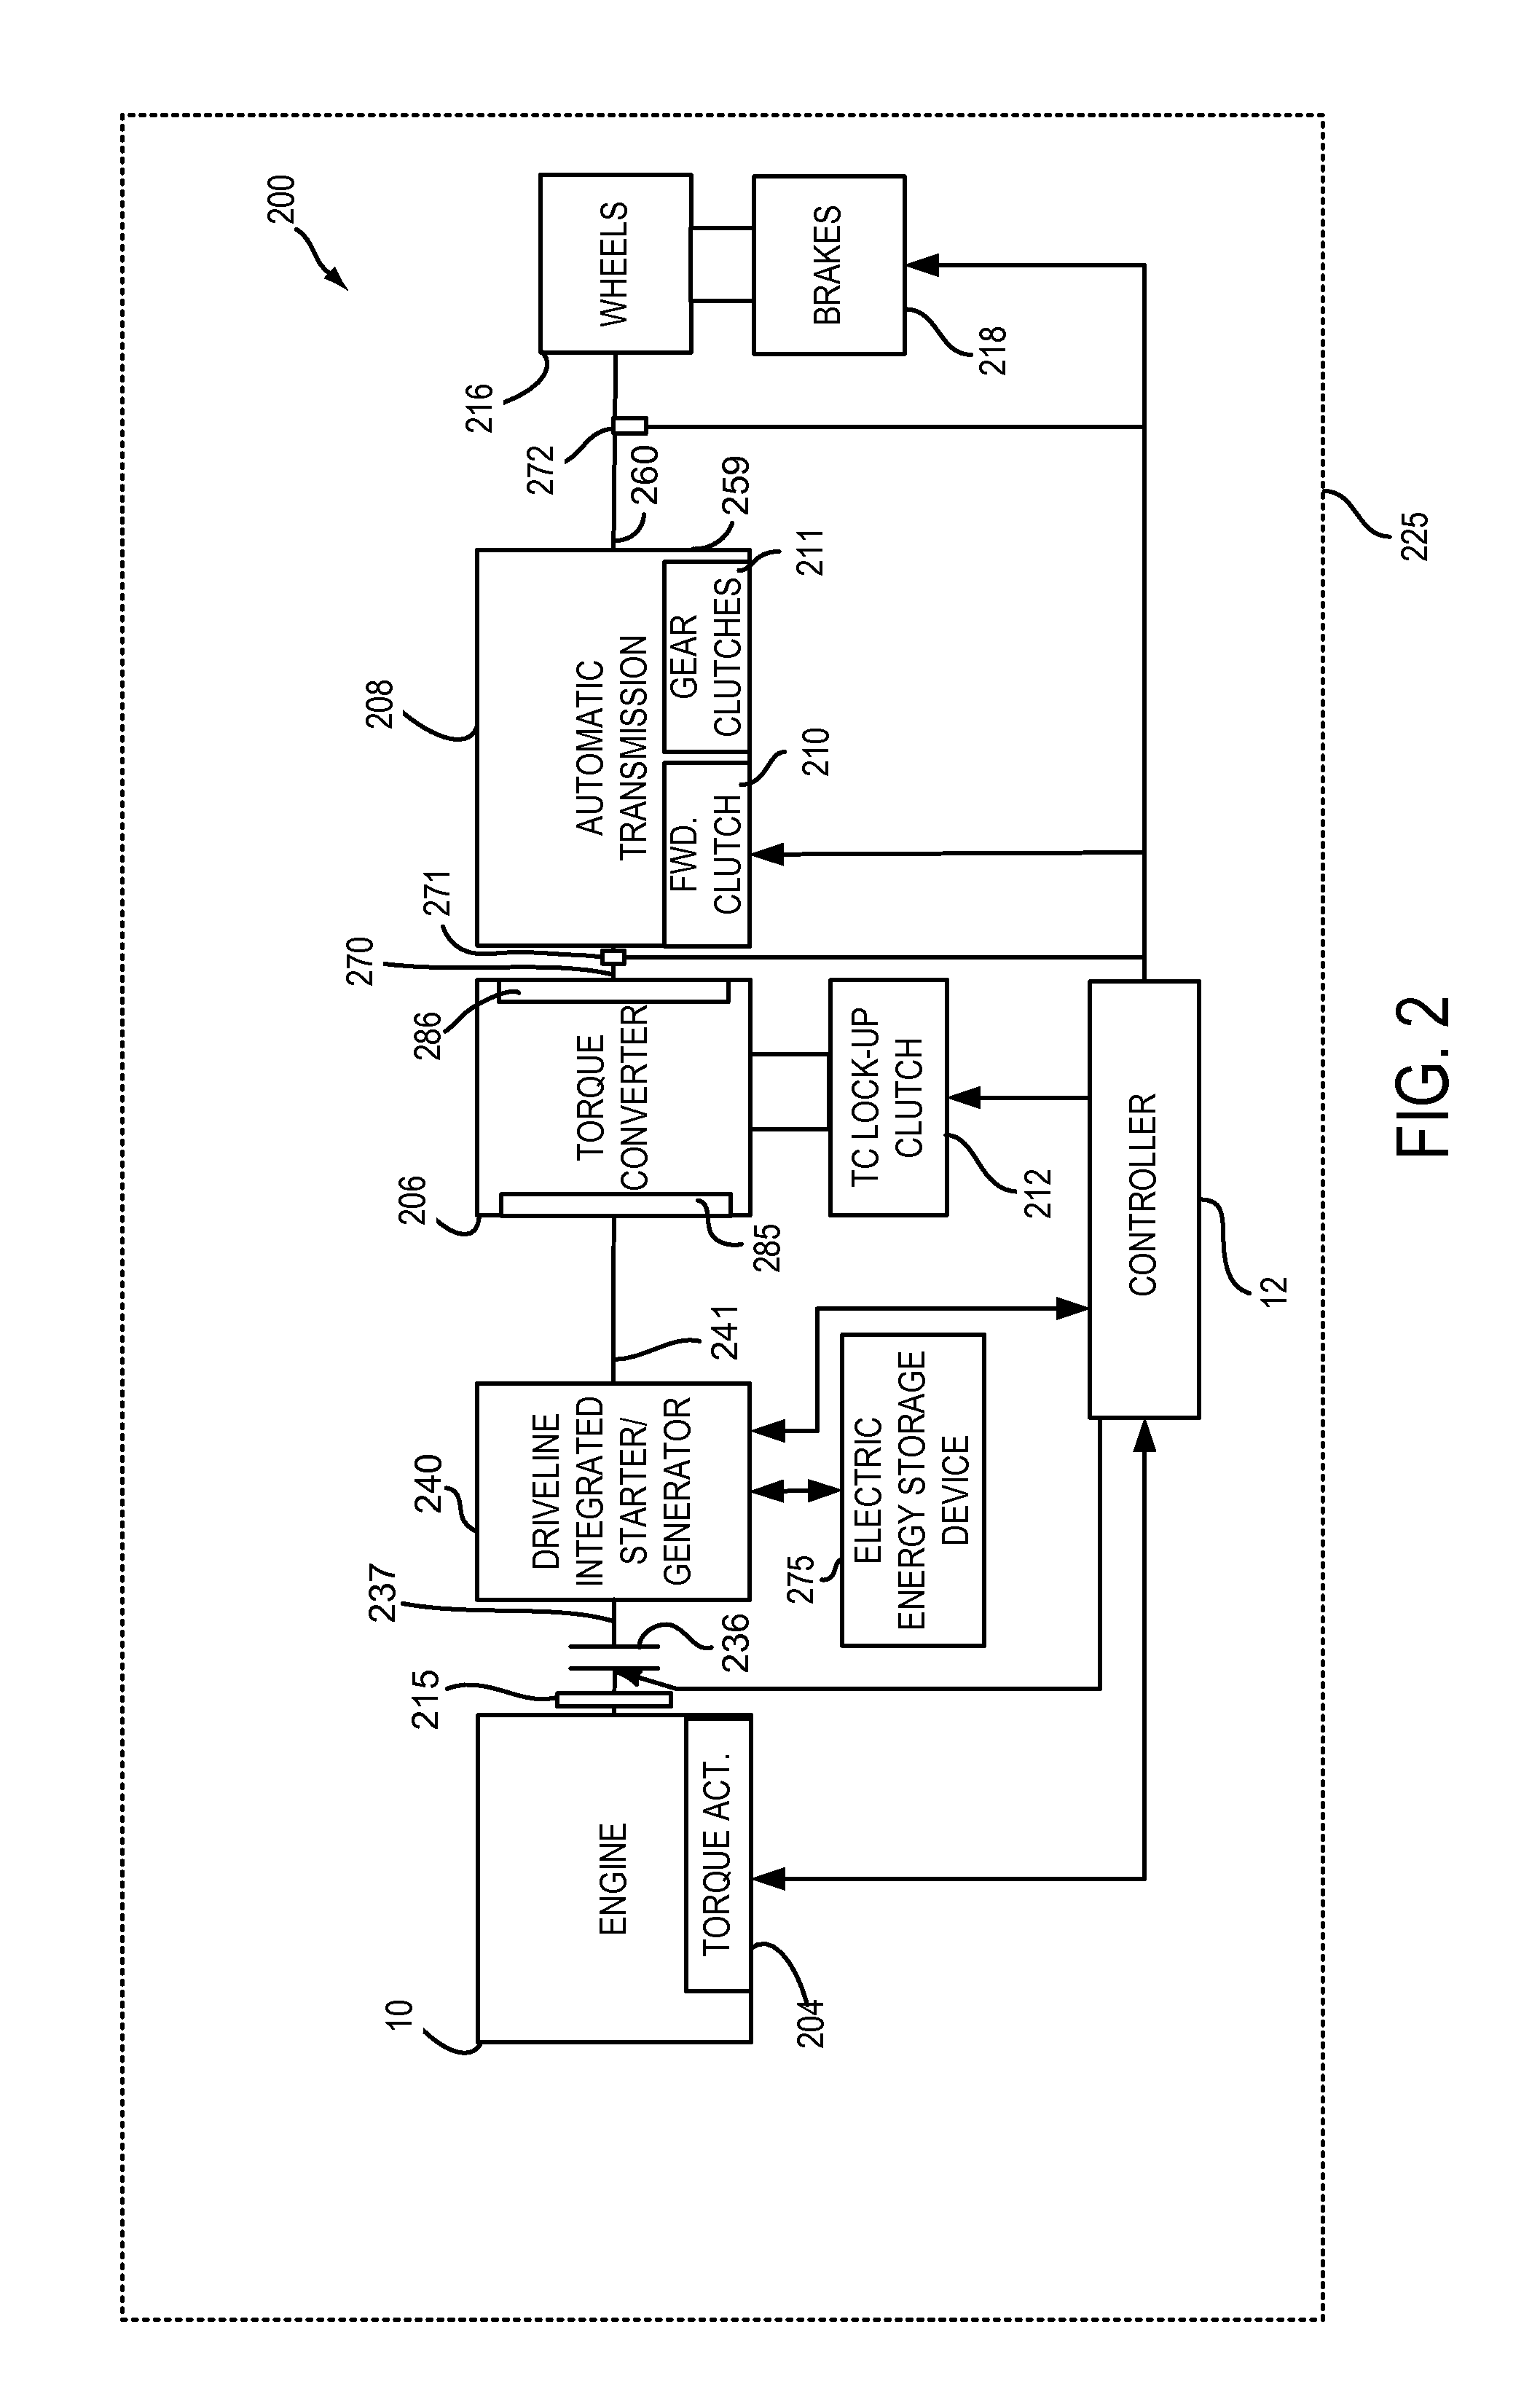 Methods and system for downshifting during regeneration